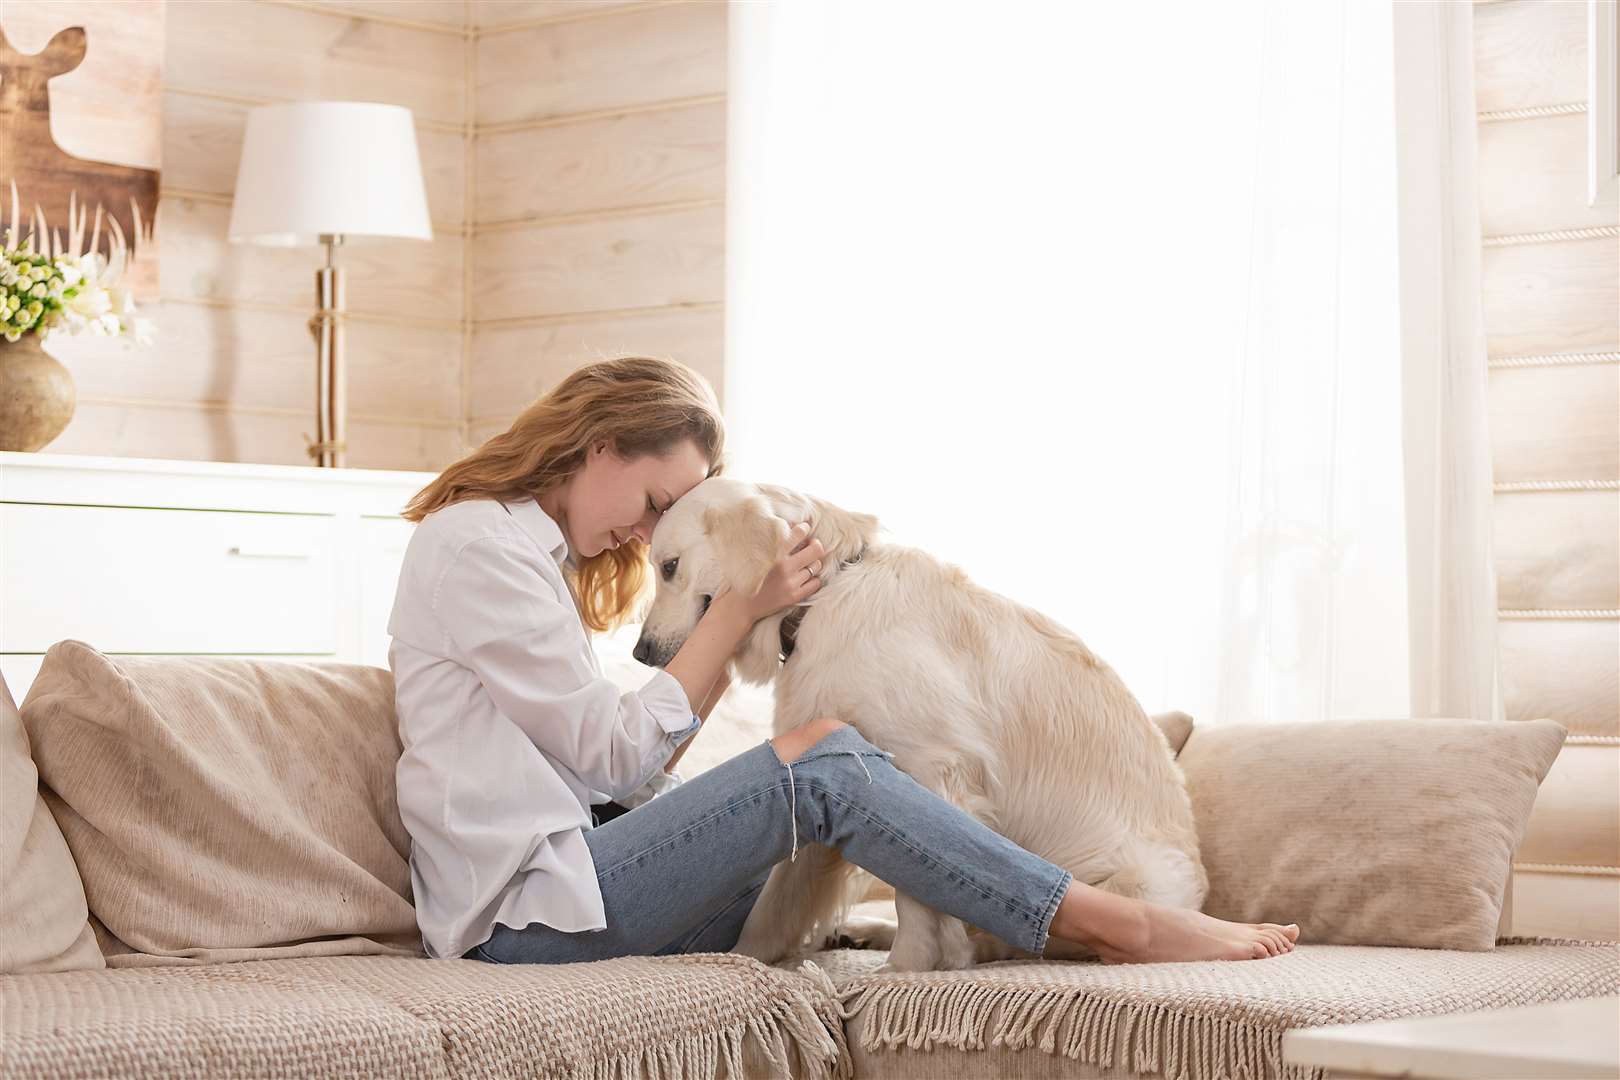 Dogs often seem to understand when we are in need of comfort.